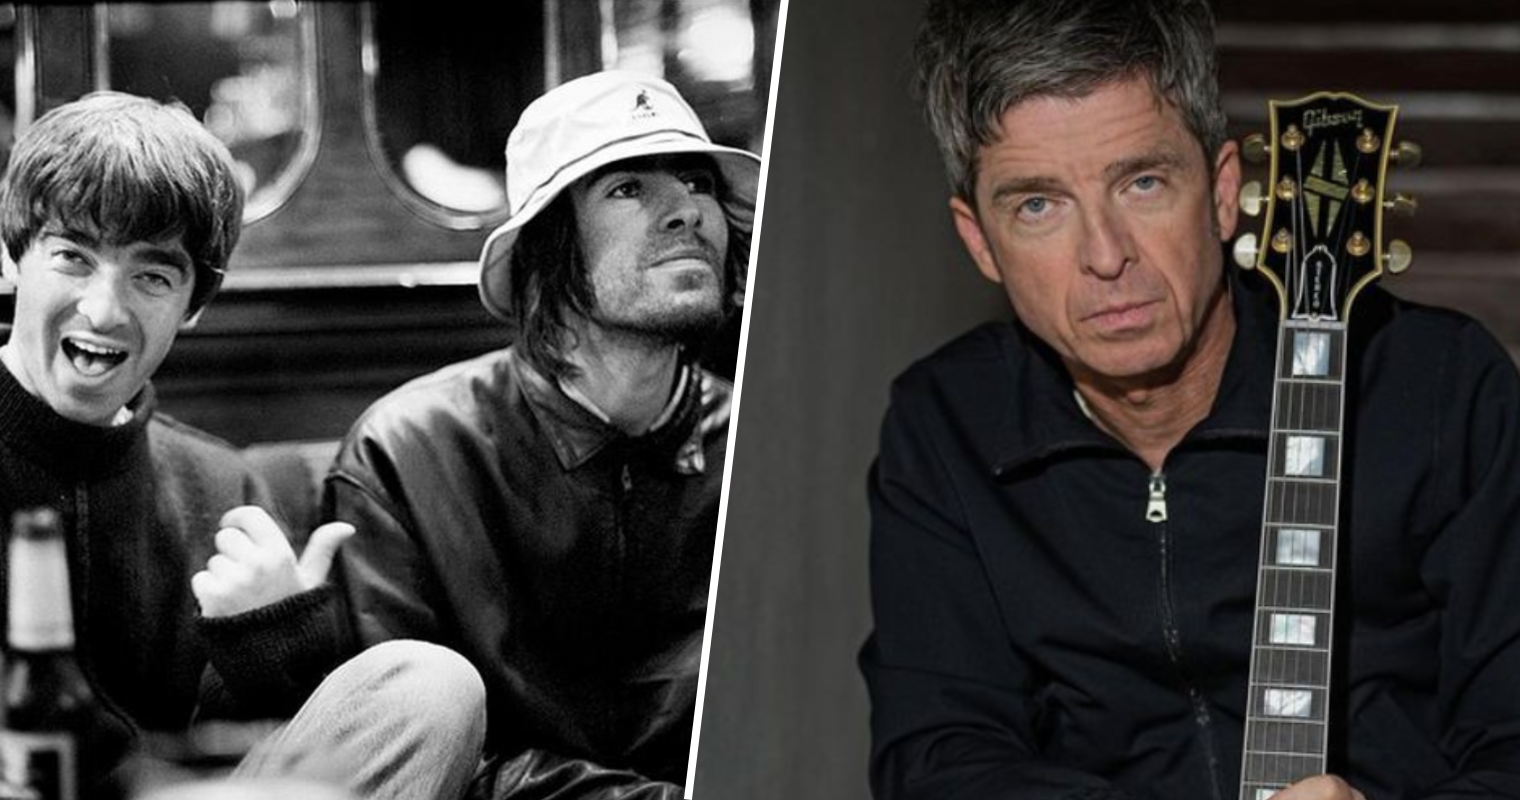 Oasis 'reunion' dates revealed as Noel and Liam Gallagher 'tease